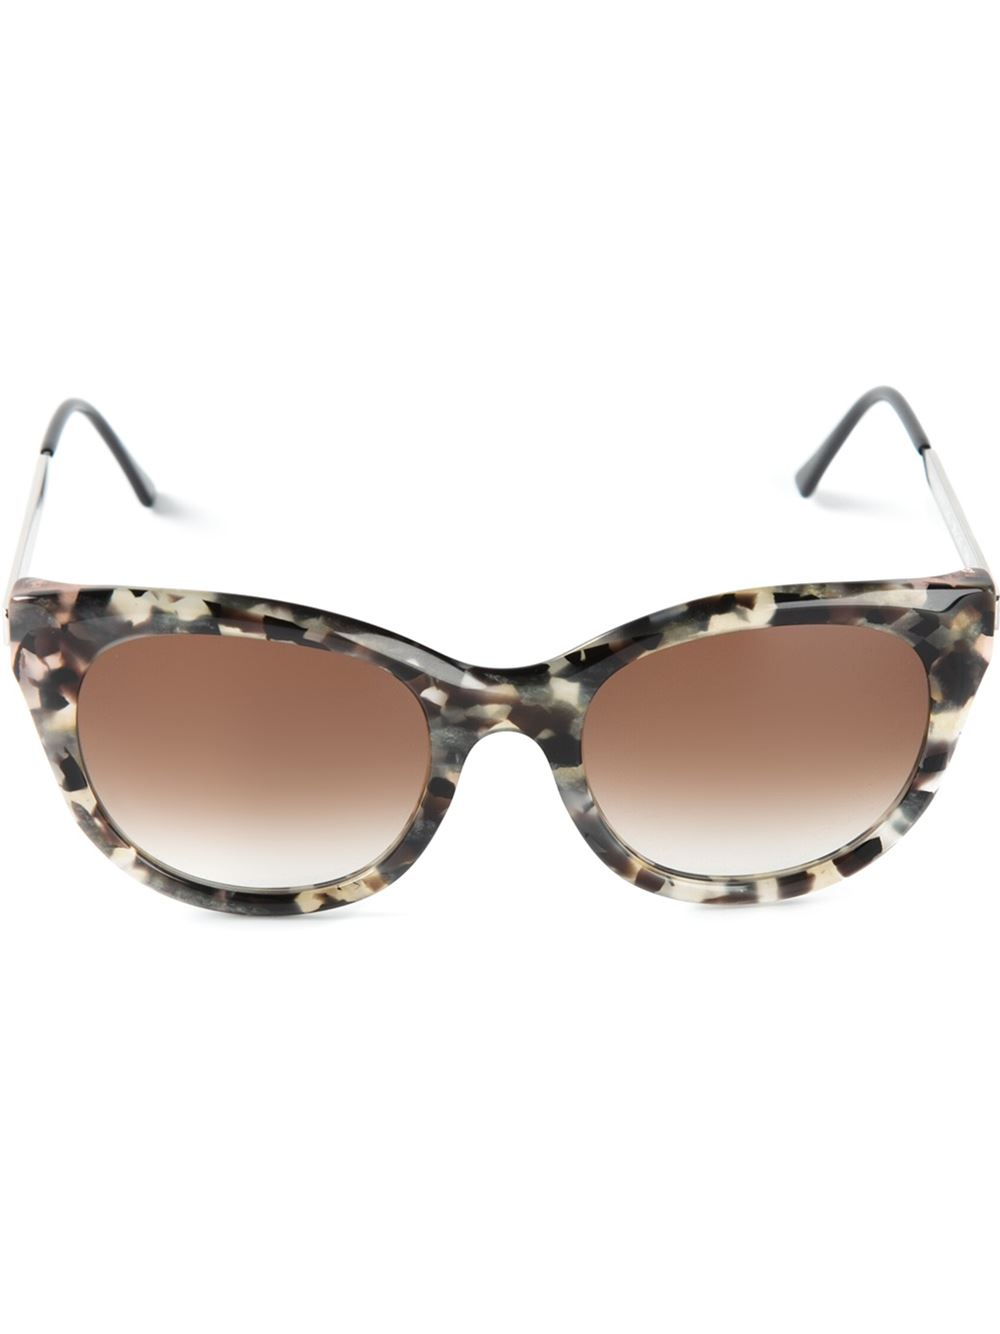 Lyst Thierry Lasry Tortoise Shell Sunglasses In Gray